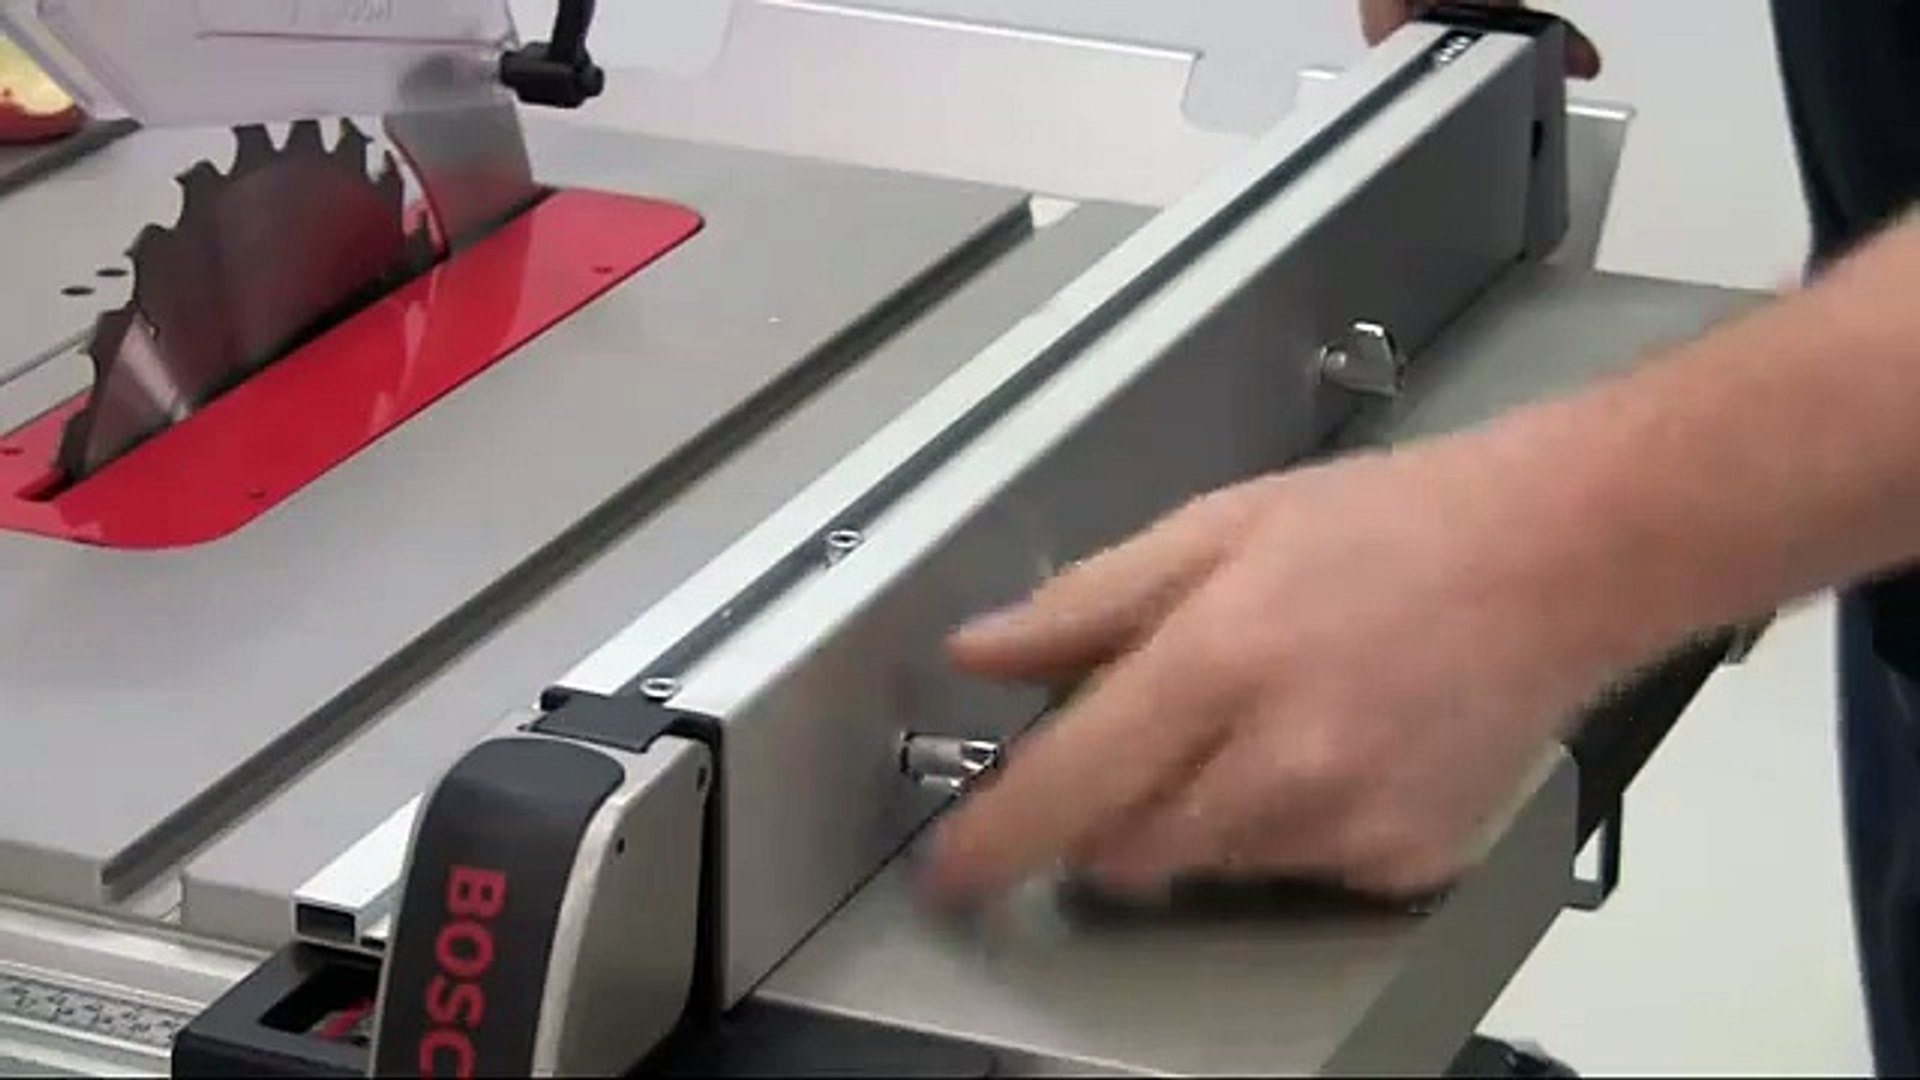 Bosch Gts 10 Xc Professional Table Saw Uk Video Dailymotion